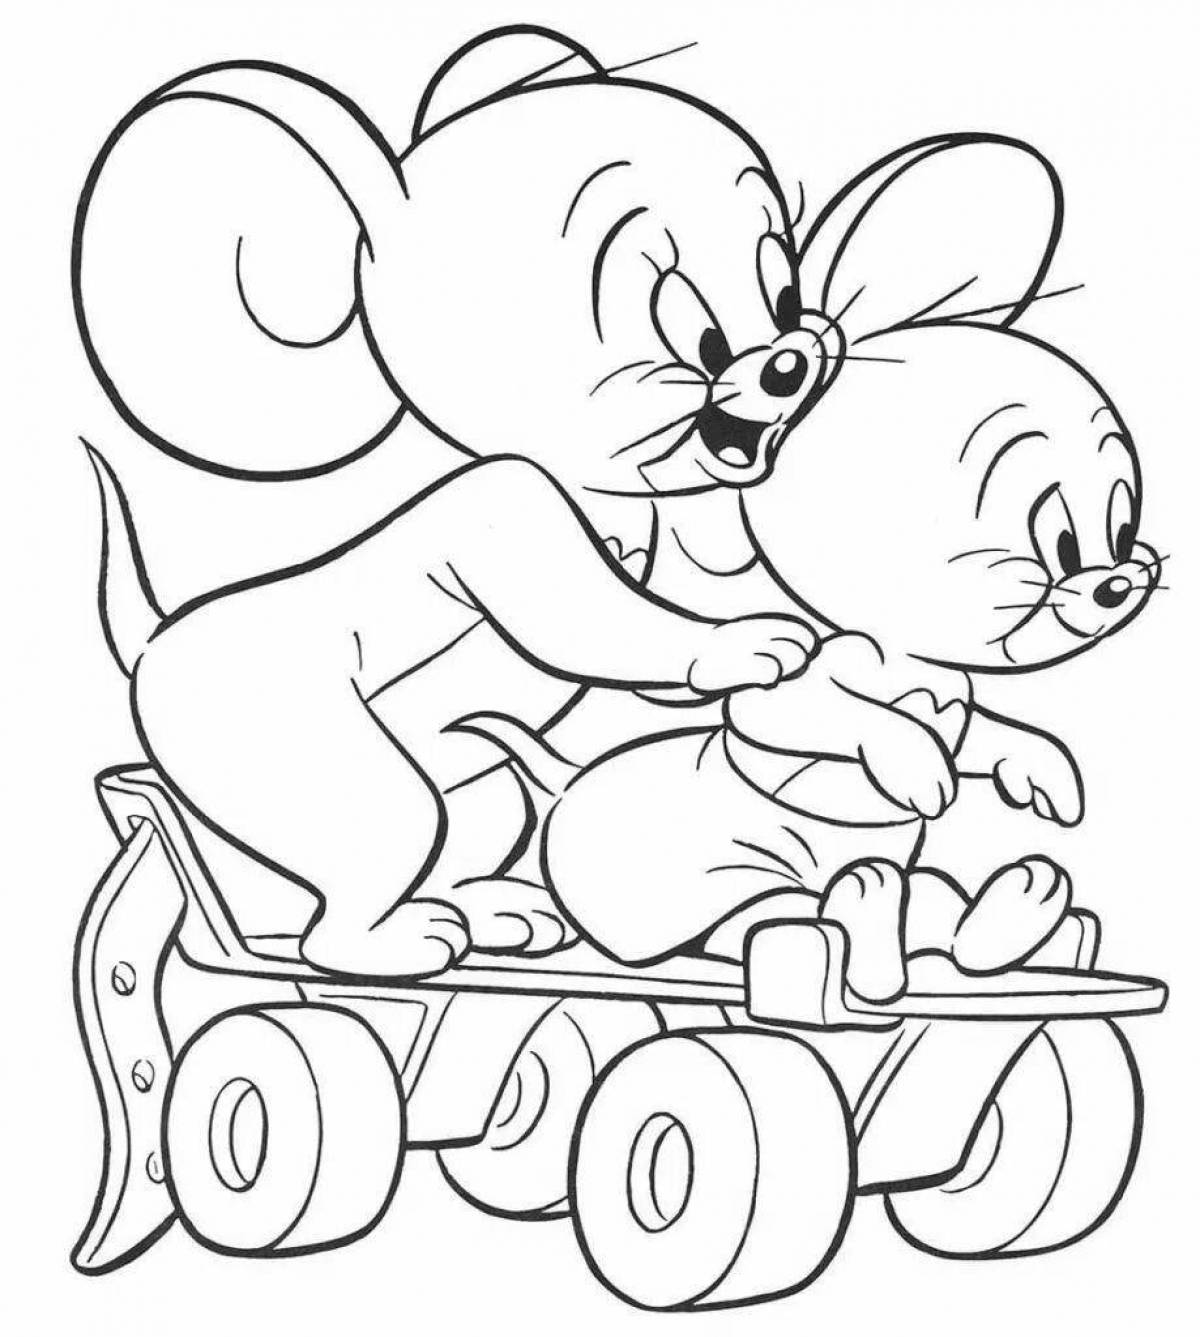 An entertaining coloring book for children from cartoons 6-7 years old